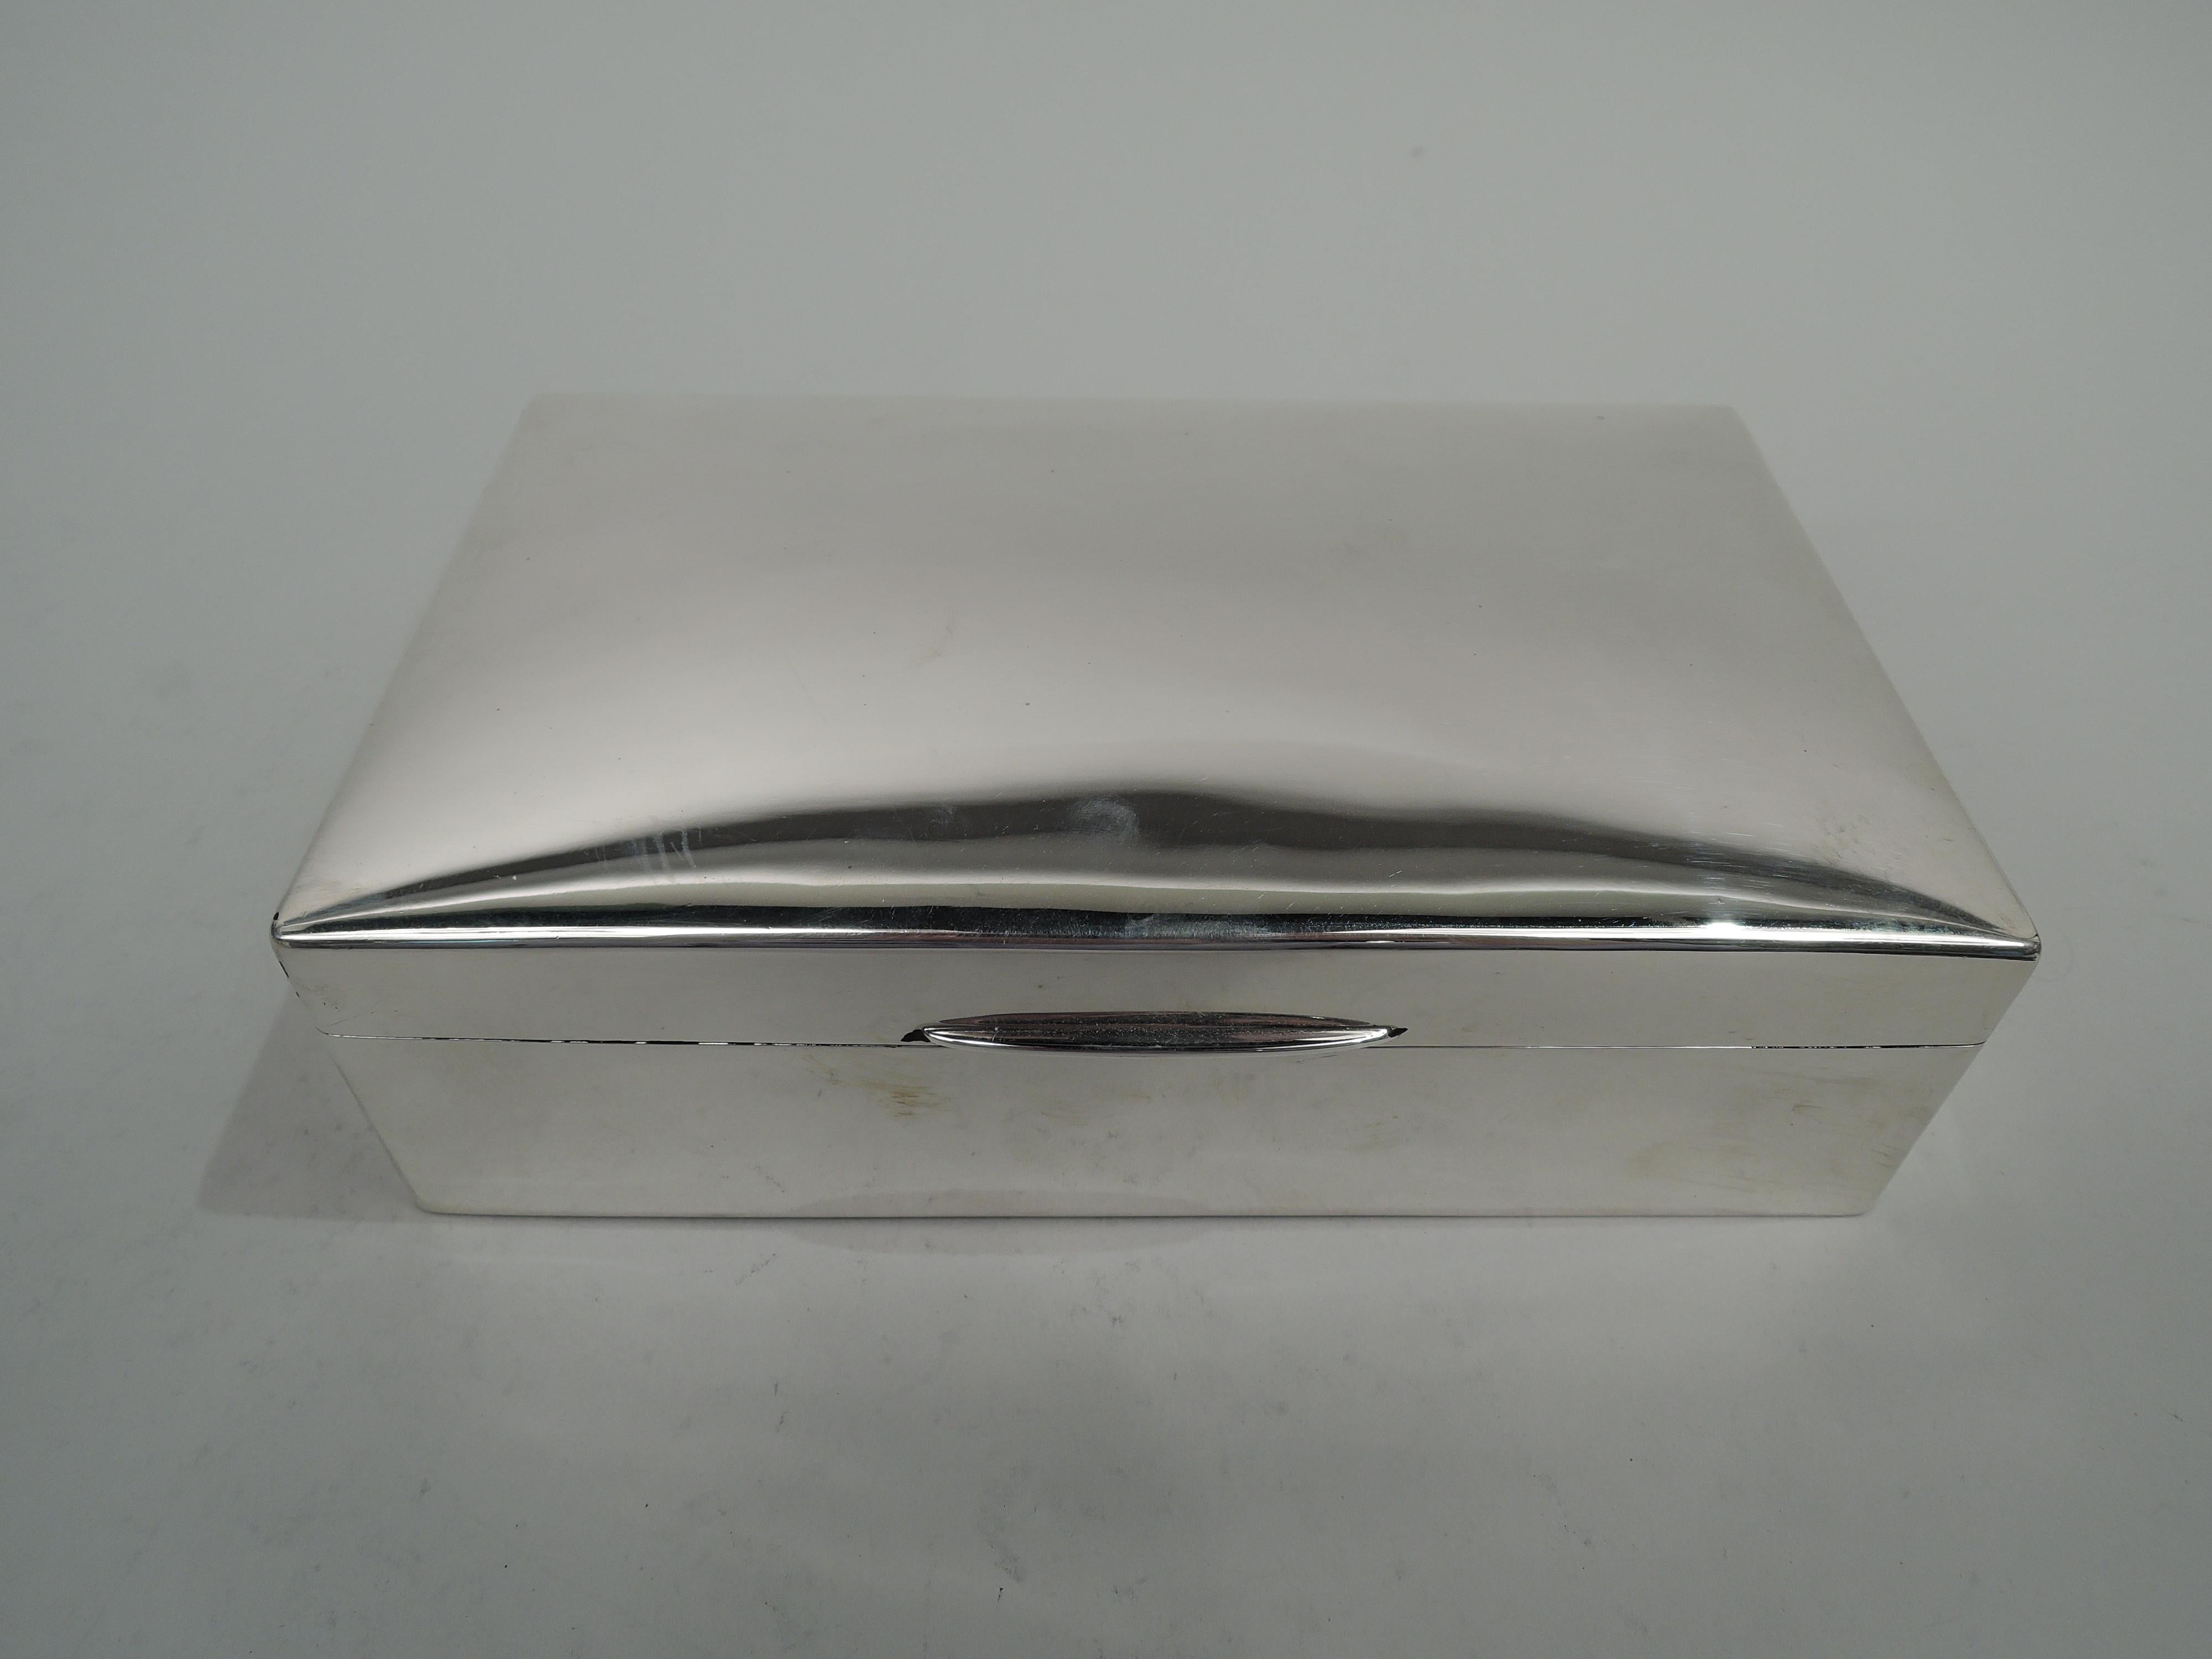 George V sterling silver box. Made by Deakin & Francis in Birmingham in 1923. Rectangular with straight sides and curved corners. Cover hinged with gently curved top and tapering tab. Box interior cedar lined and partitioned. Cover interior gilt